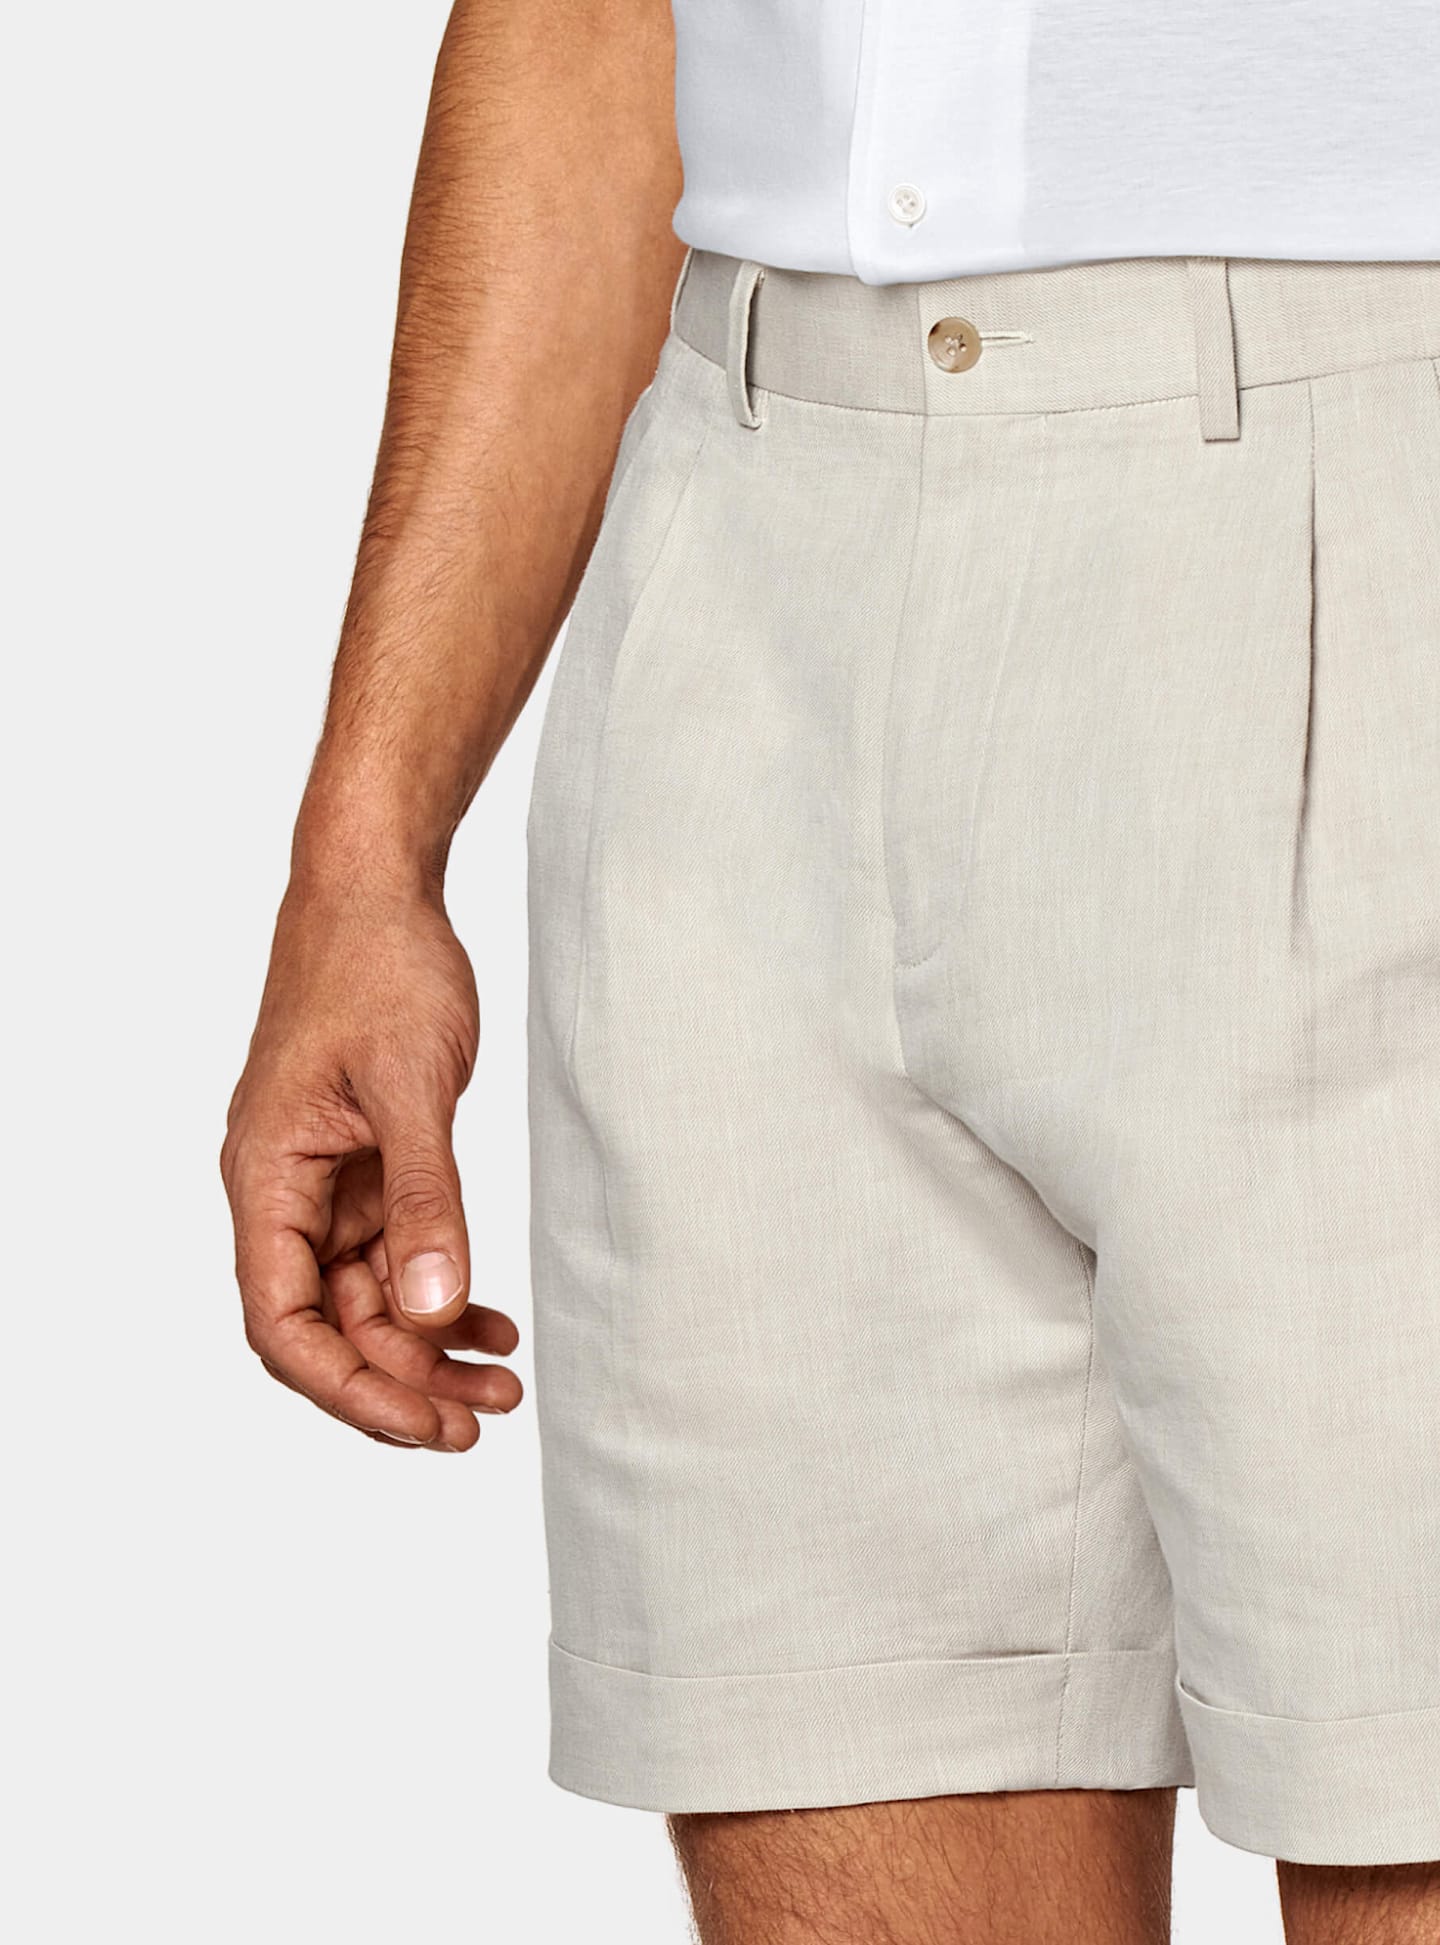 Shorts that can be paired up with a casual blazer or without for a wedding occasion on the beach.